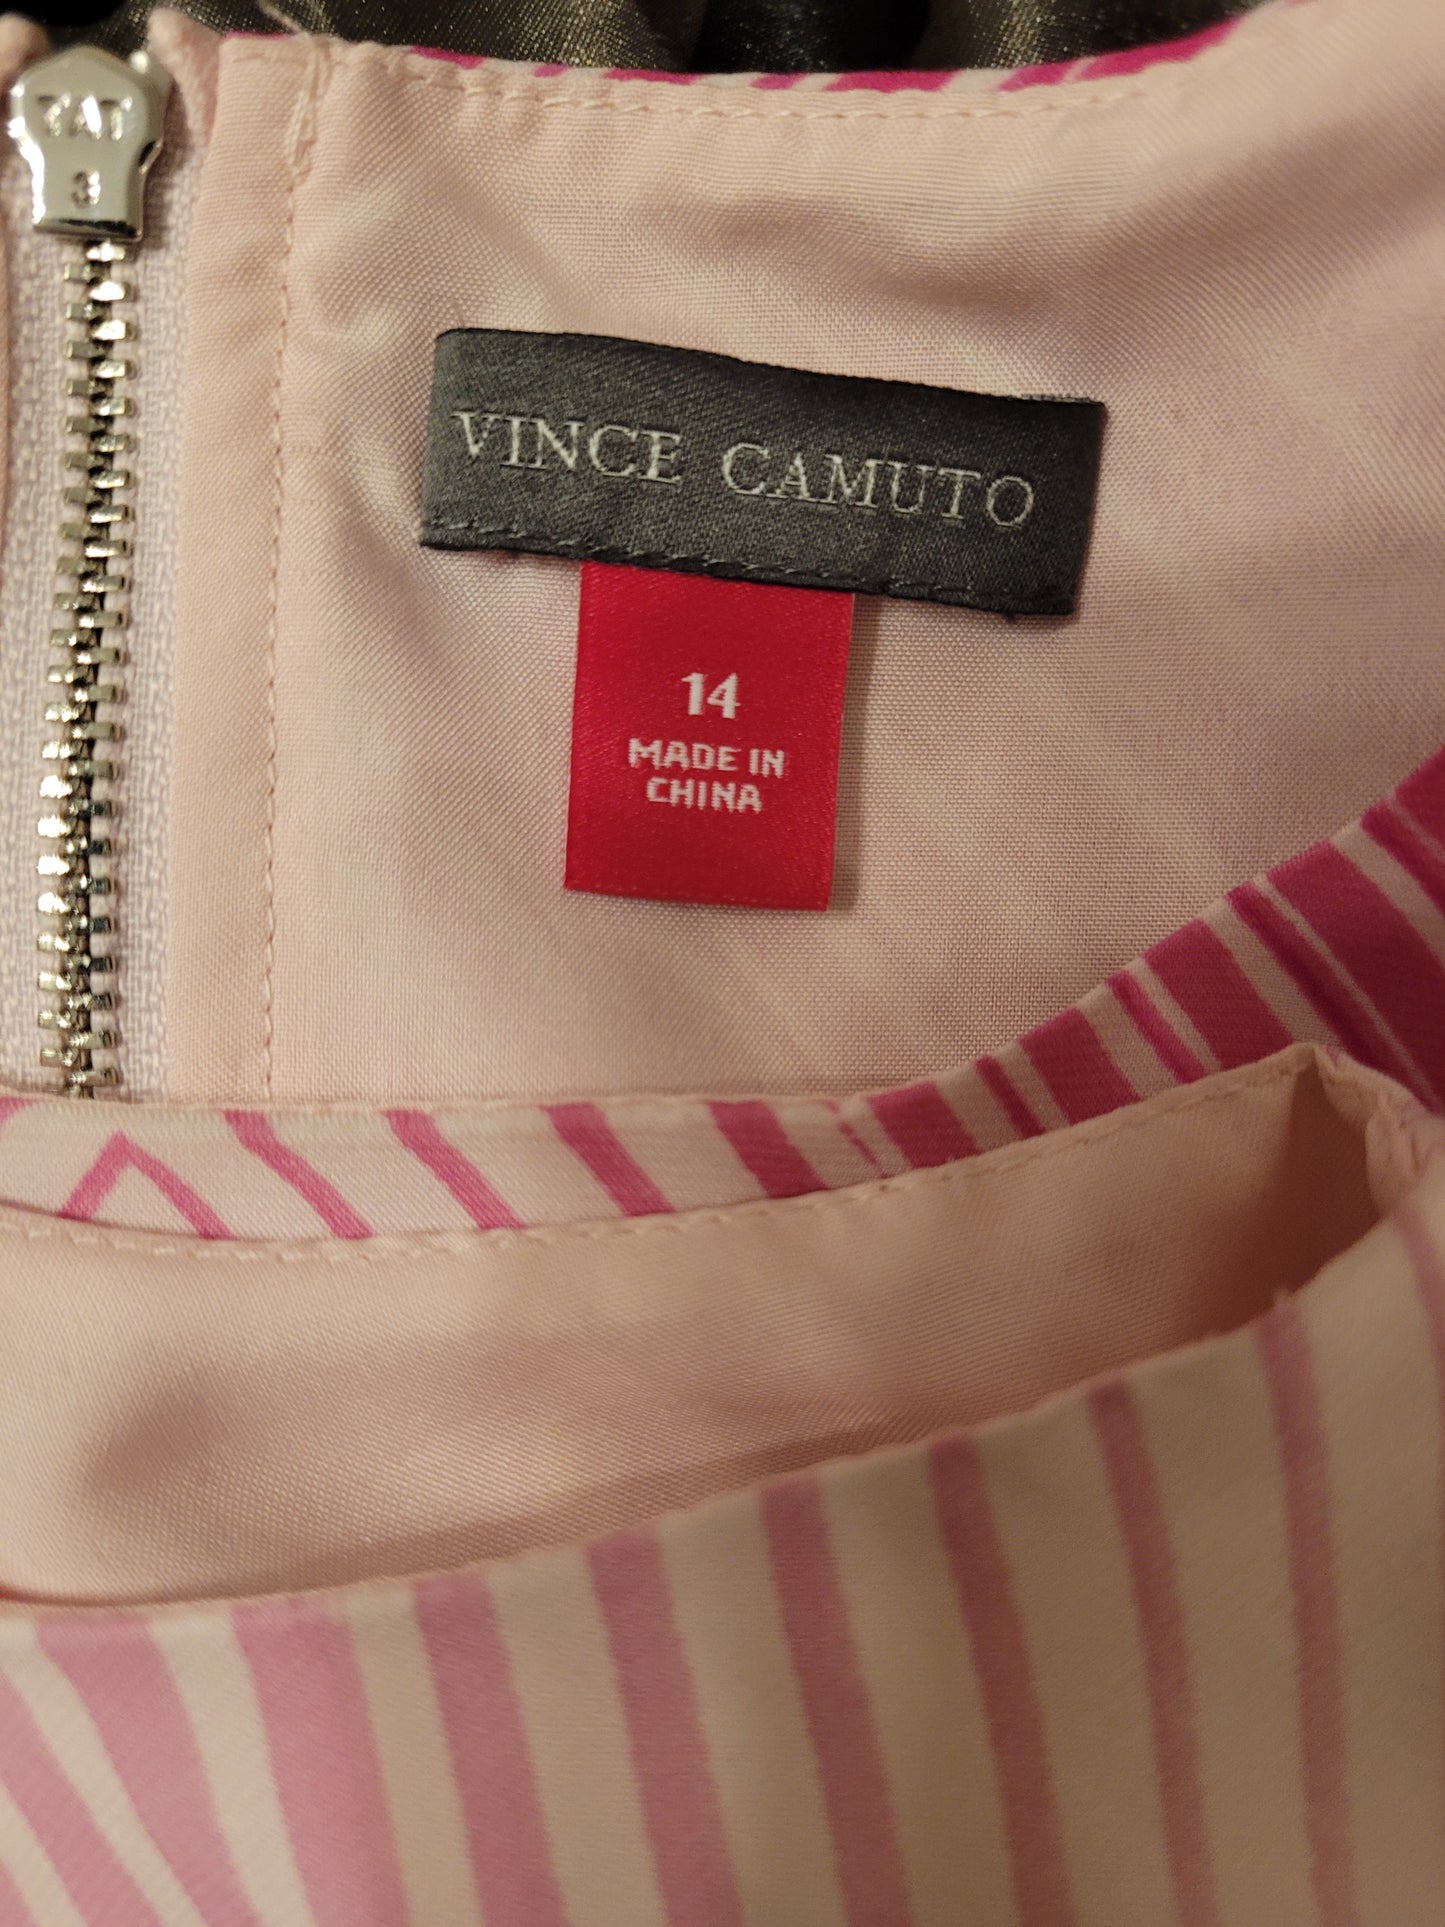 Vince Camuto Pink and White dress